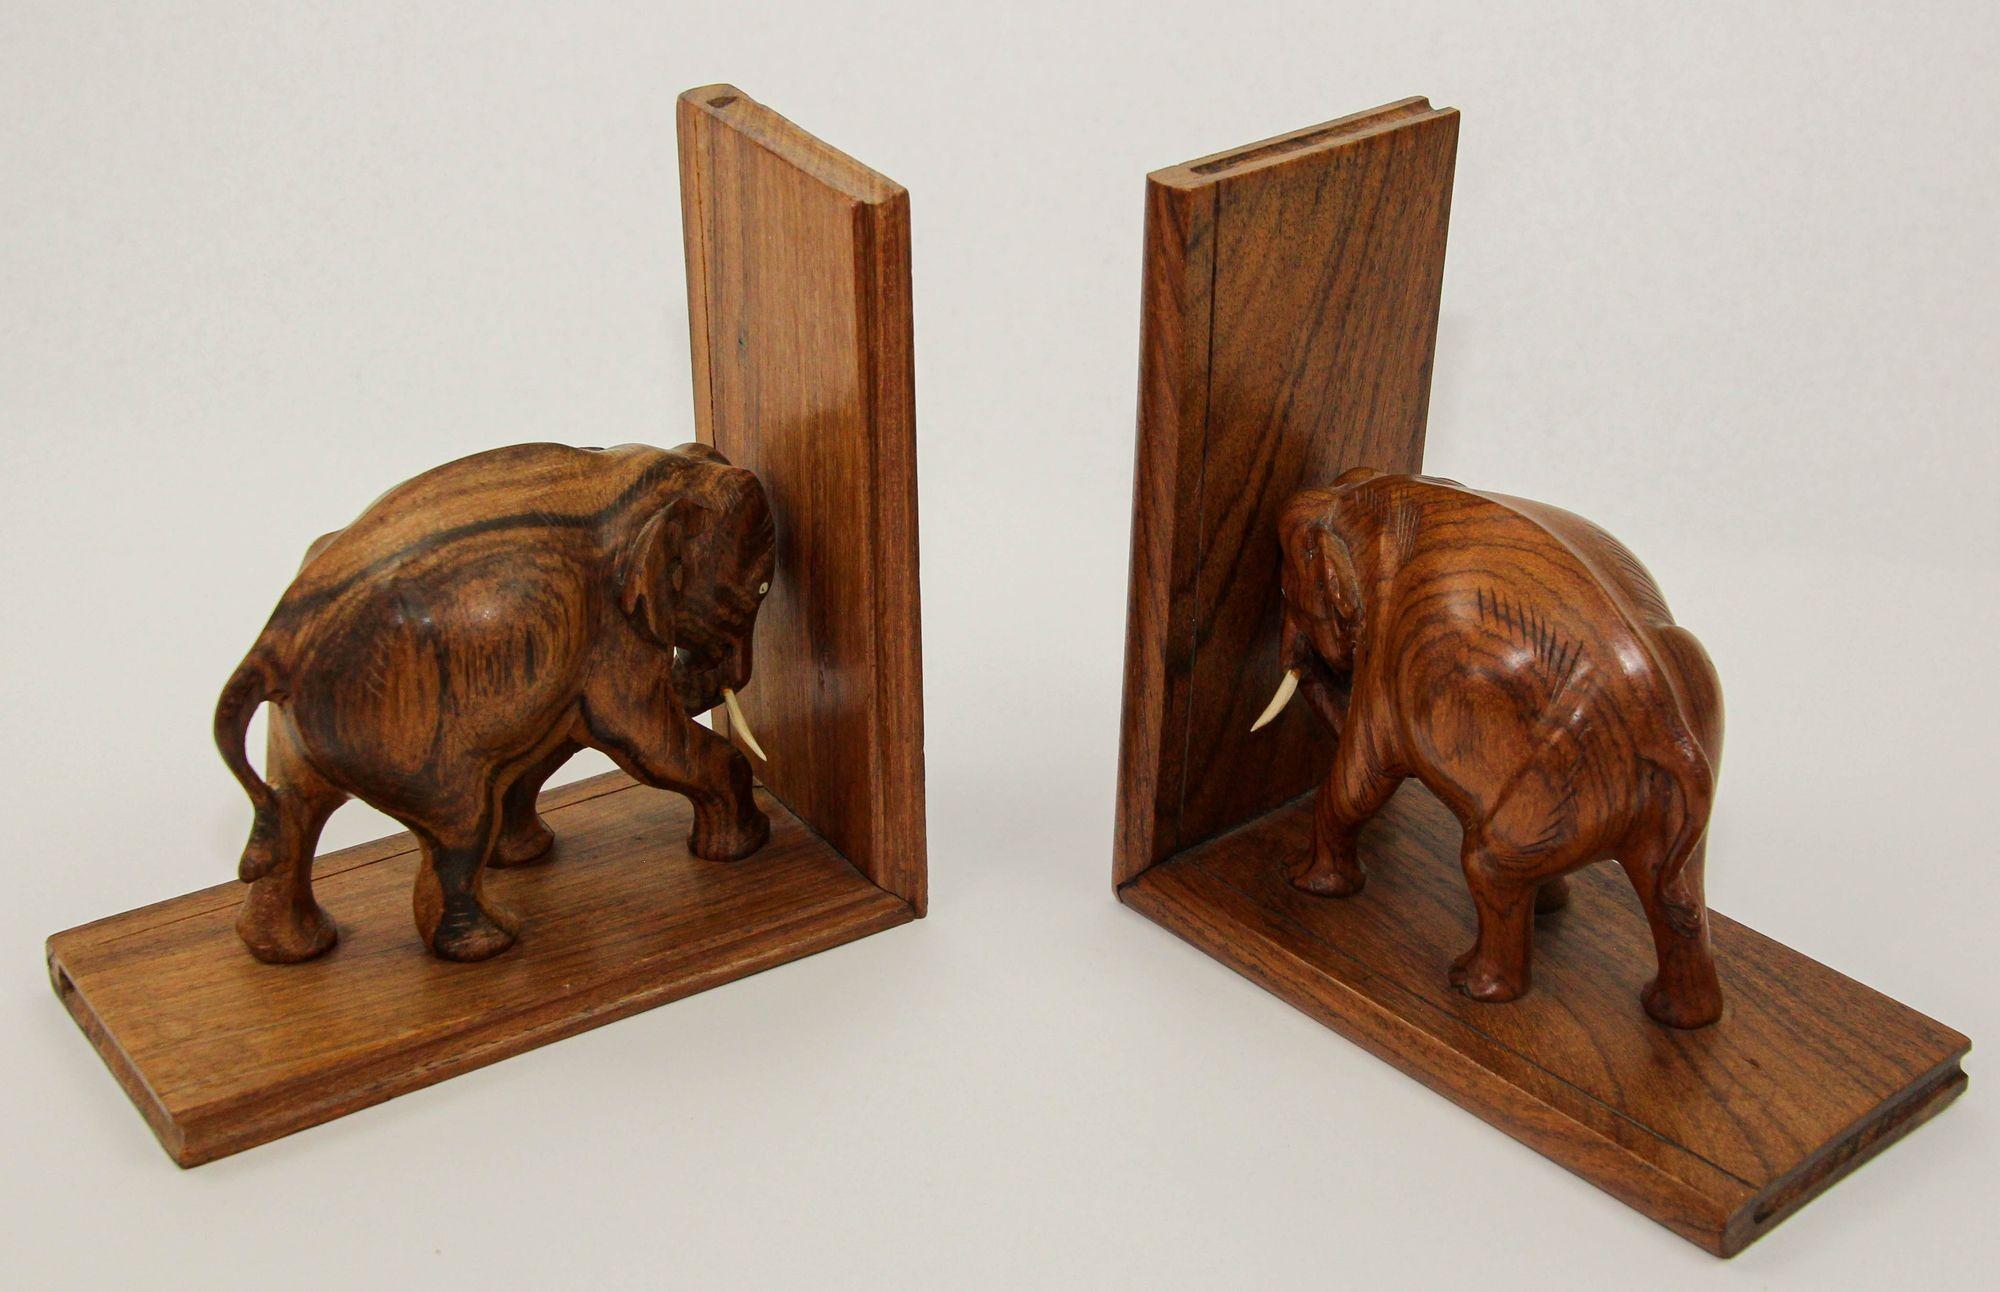 Art Deco Wooden Asian Elephant Bookends Hand Carved Rosewood India 1940s For Sale 1